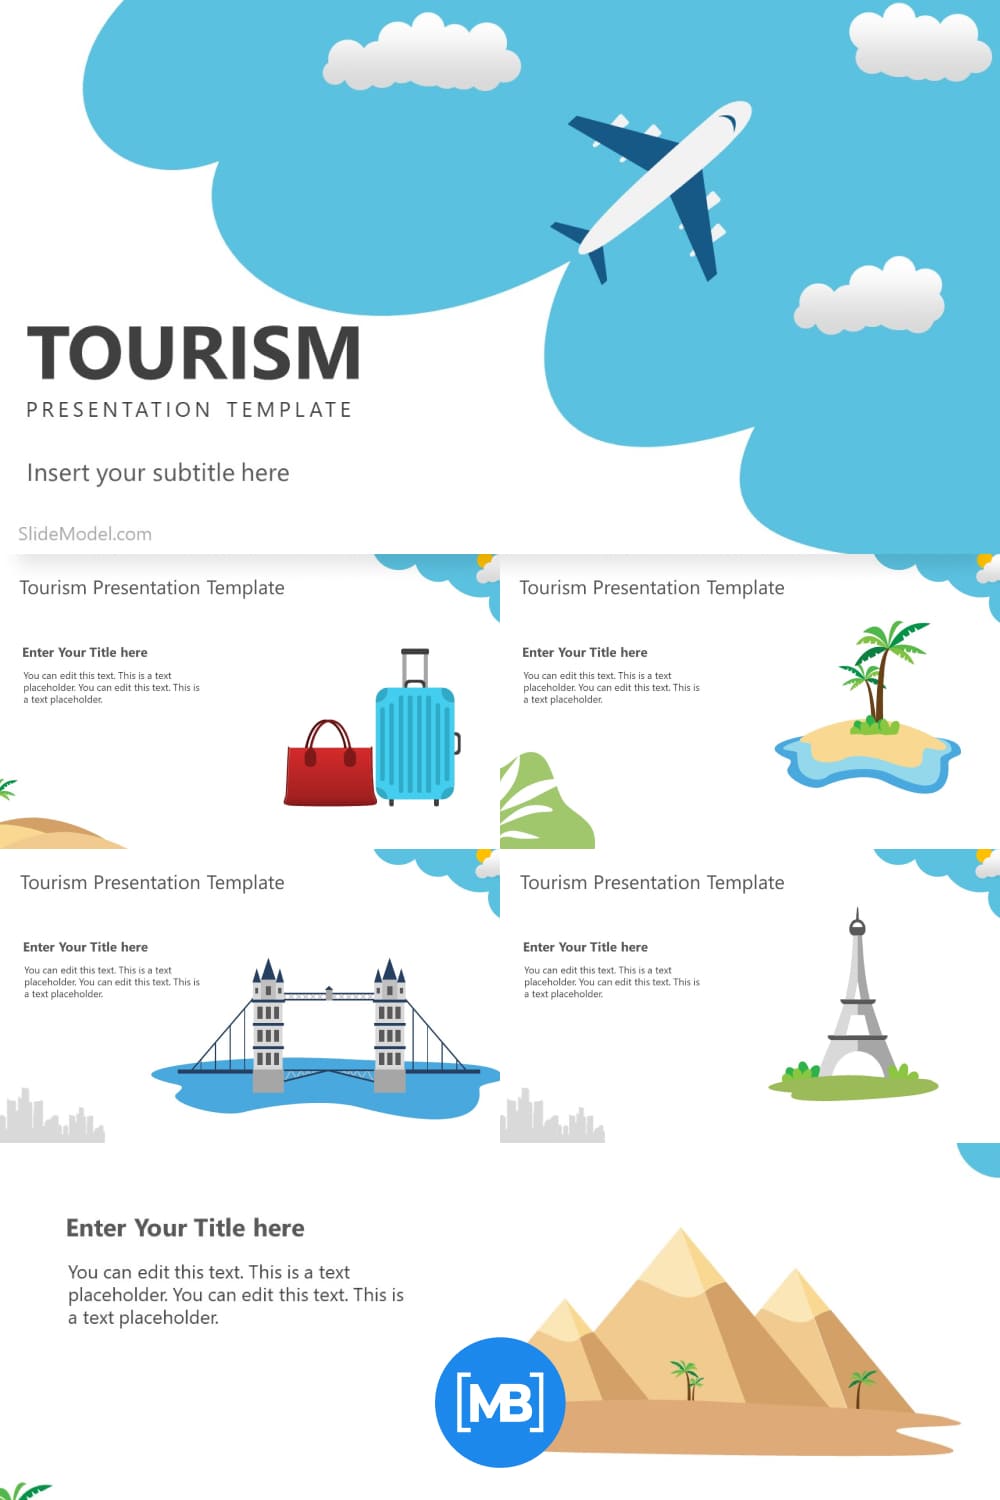 Tourism PowerPoint template.